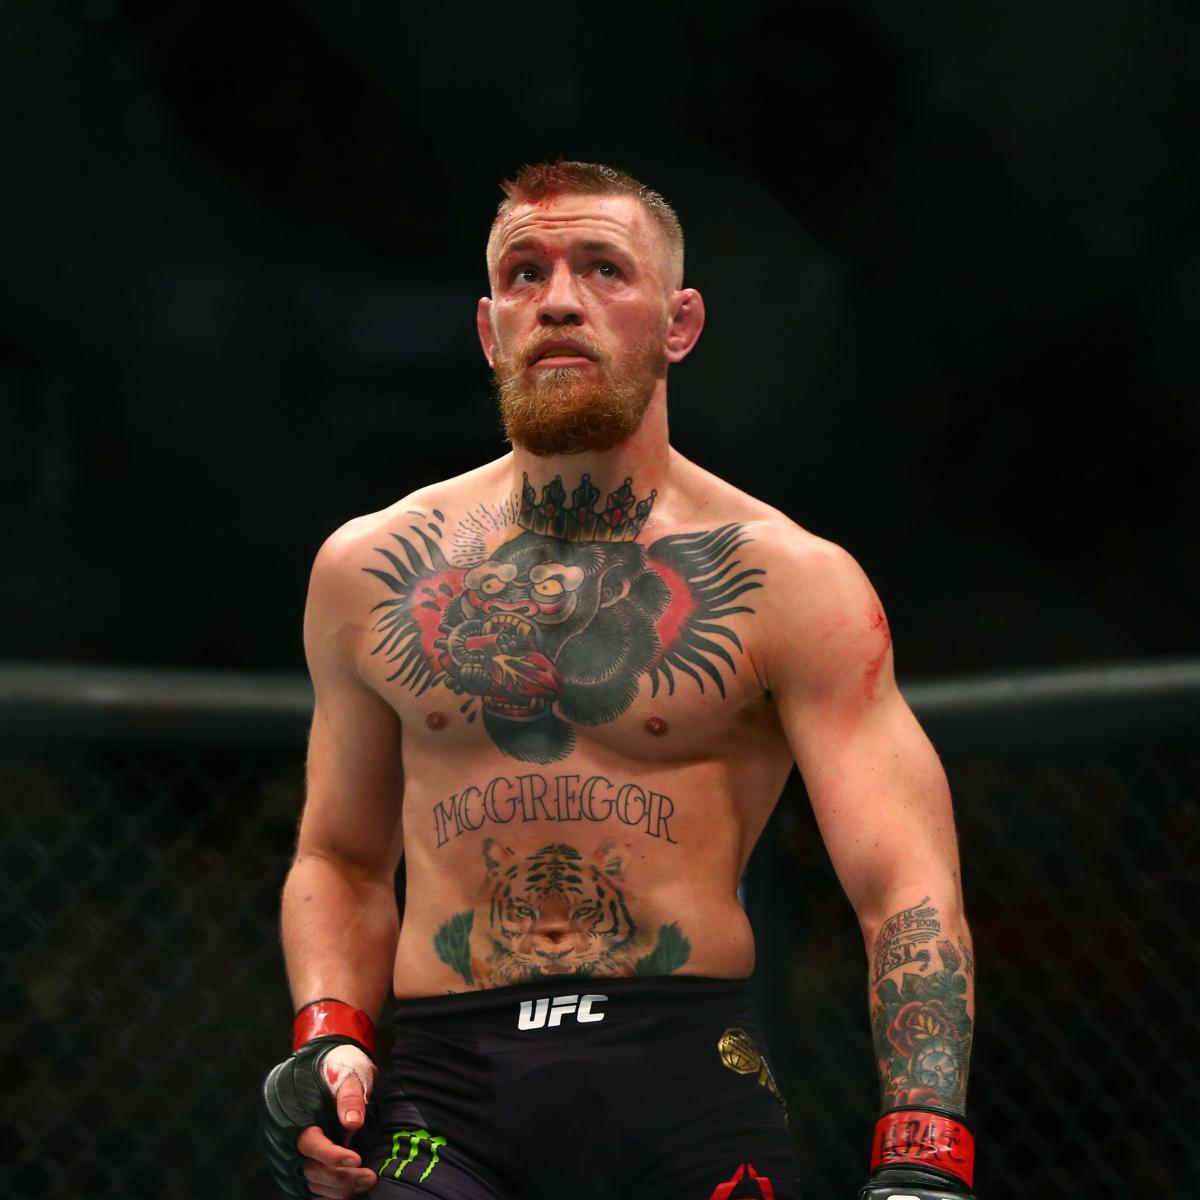 Conor McGregor Hints at Retirement in Post on Twitter